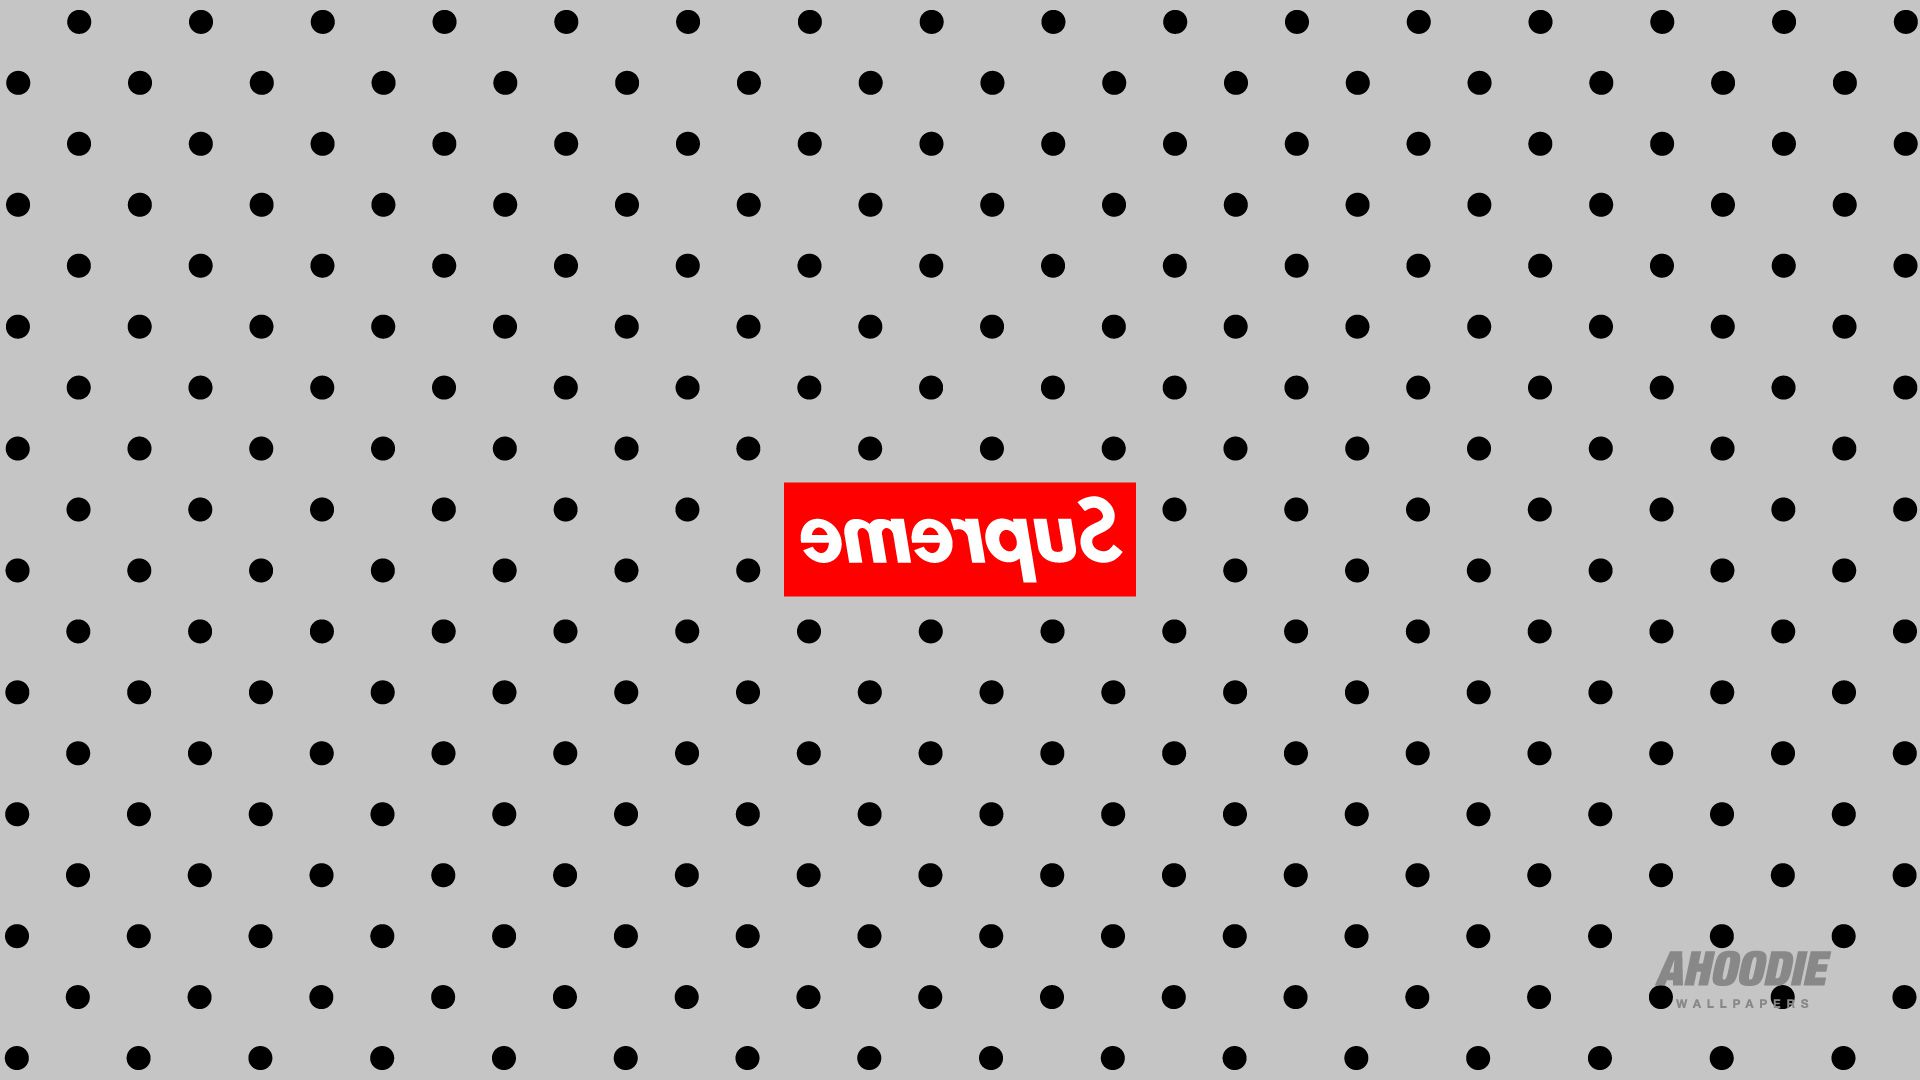 Download Supreme Logo in Red and White Wallpaper